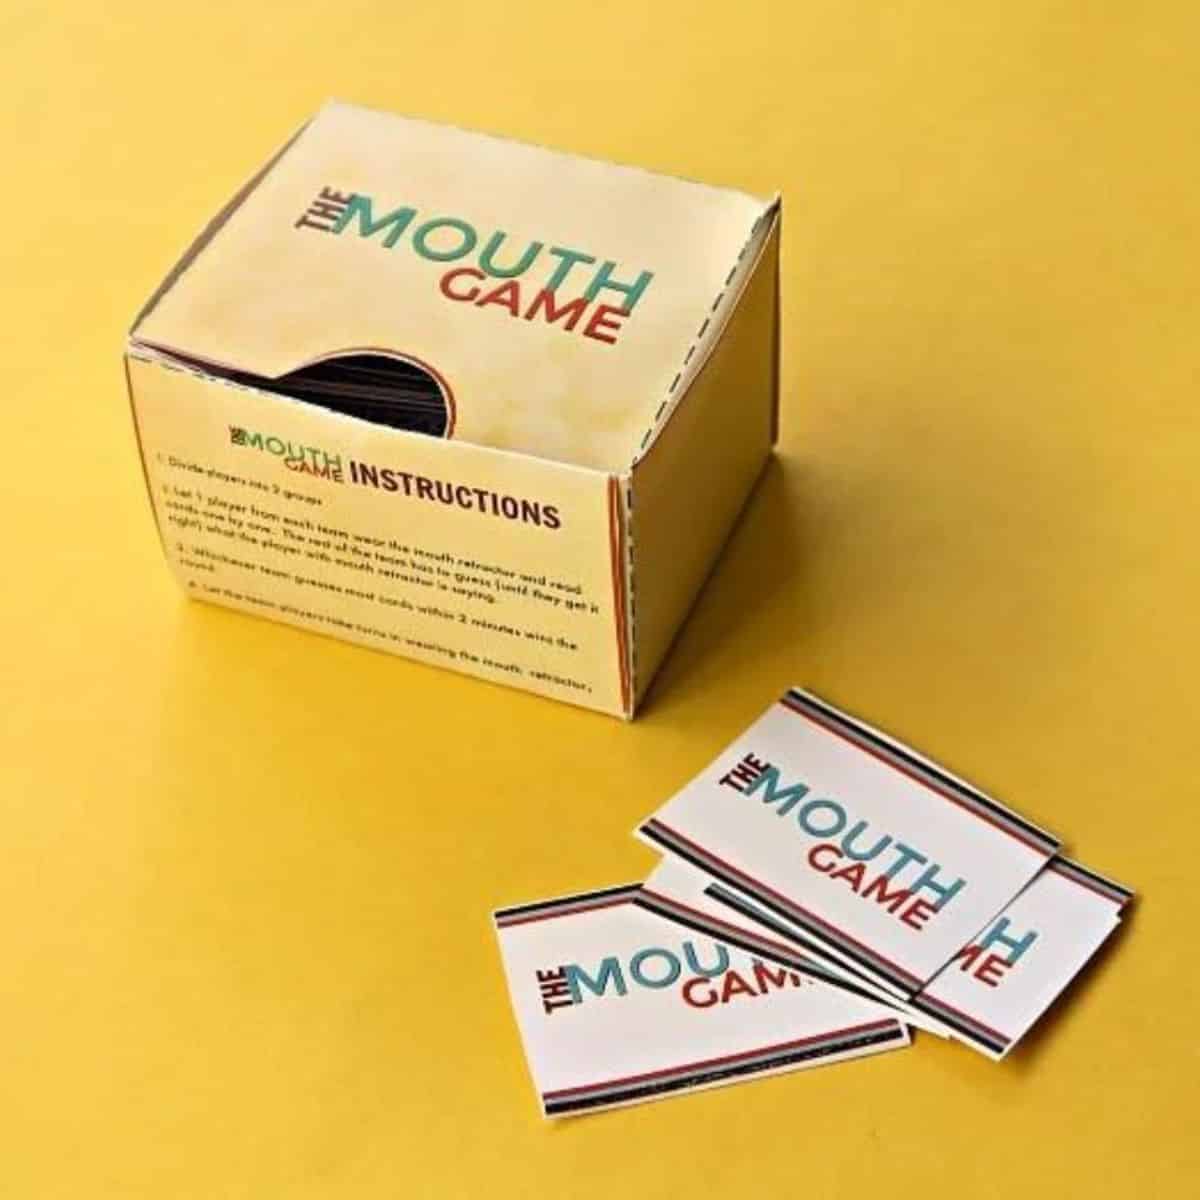 Mouth game box with a labels on a yellow background.